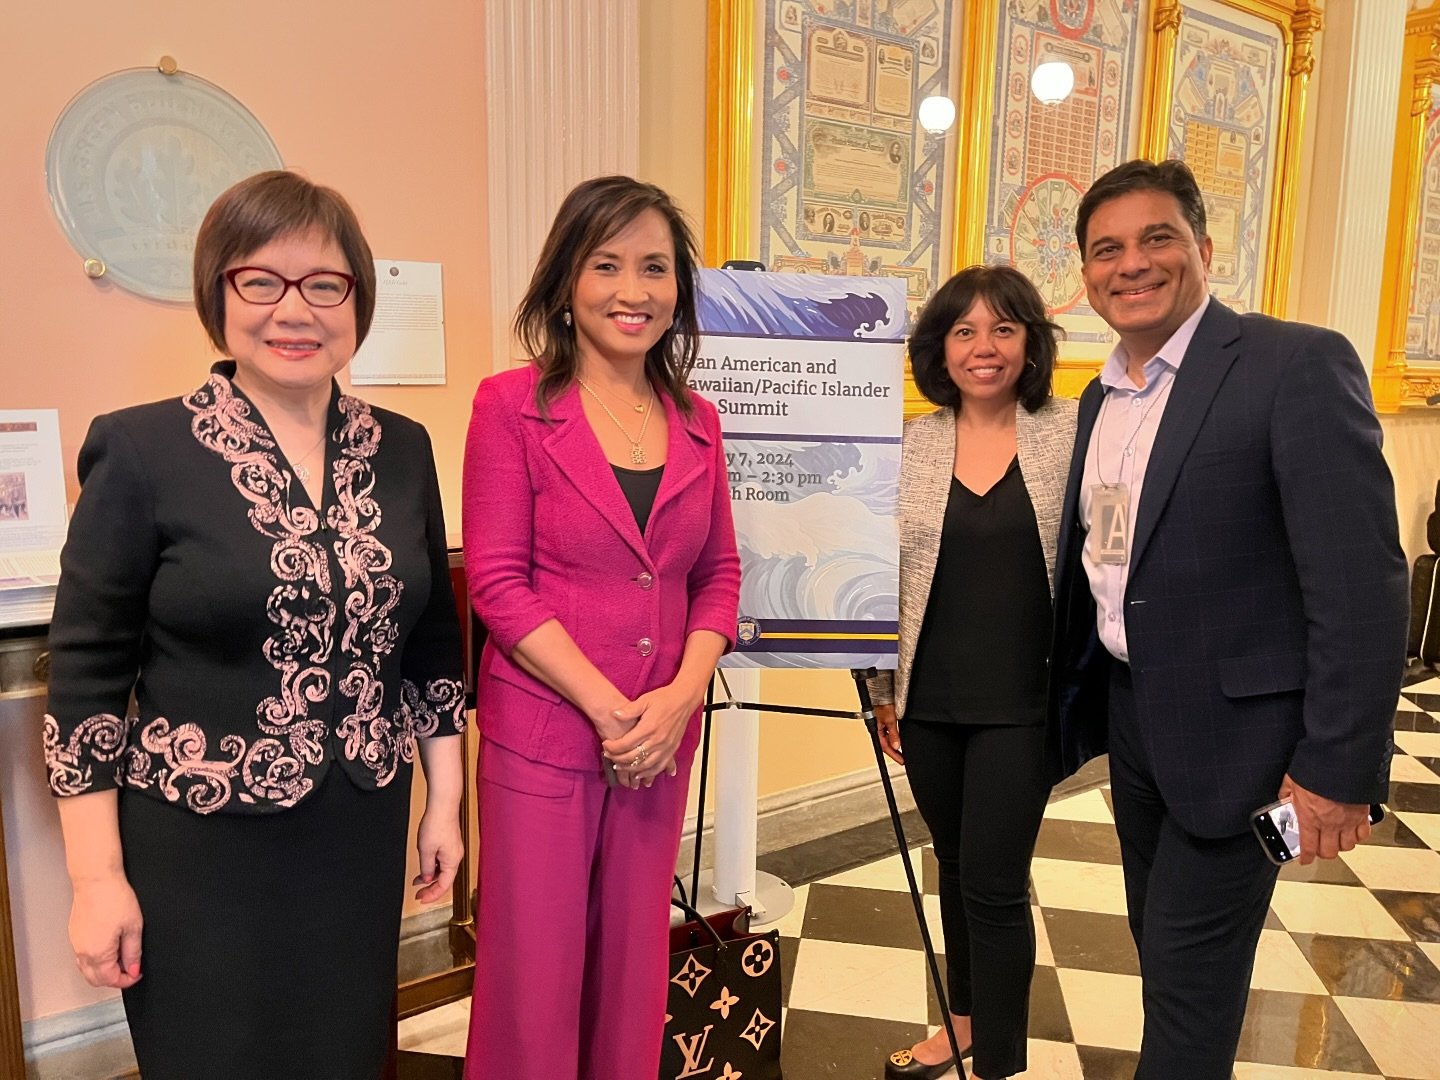 Happy AANHPI Heritage Month!

National ACE's CEO/President Chiling Tong spoke at the @treasurydept 2024 #AANHPI Economic Summit today. Tong is pictured alongside (from left) @nmsdchq President Ying McGuire, and National ACE boardmembers from @jpmorga